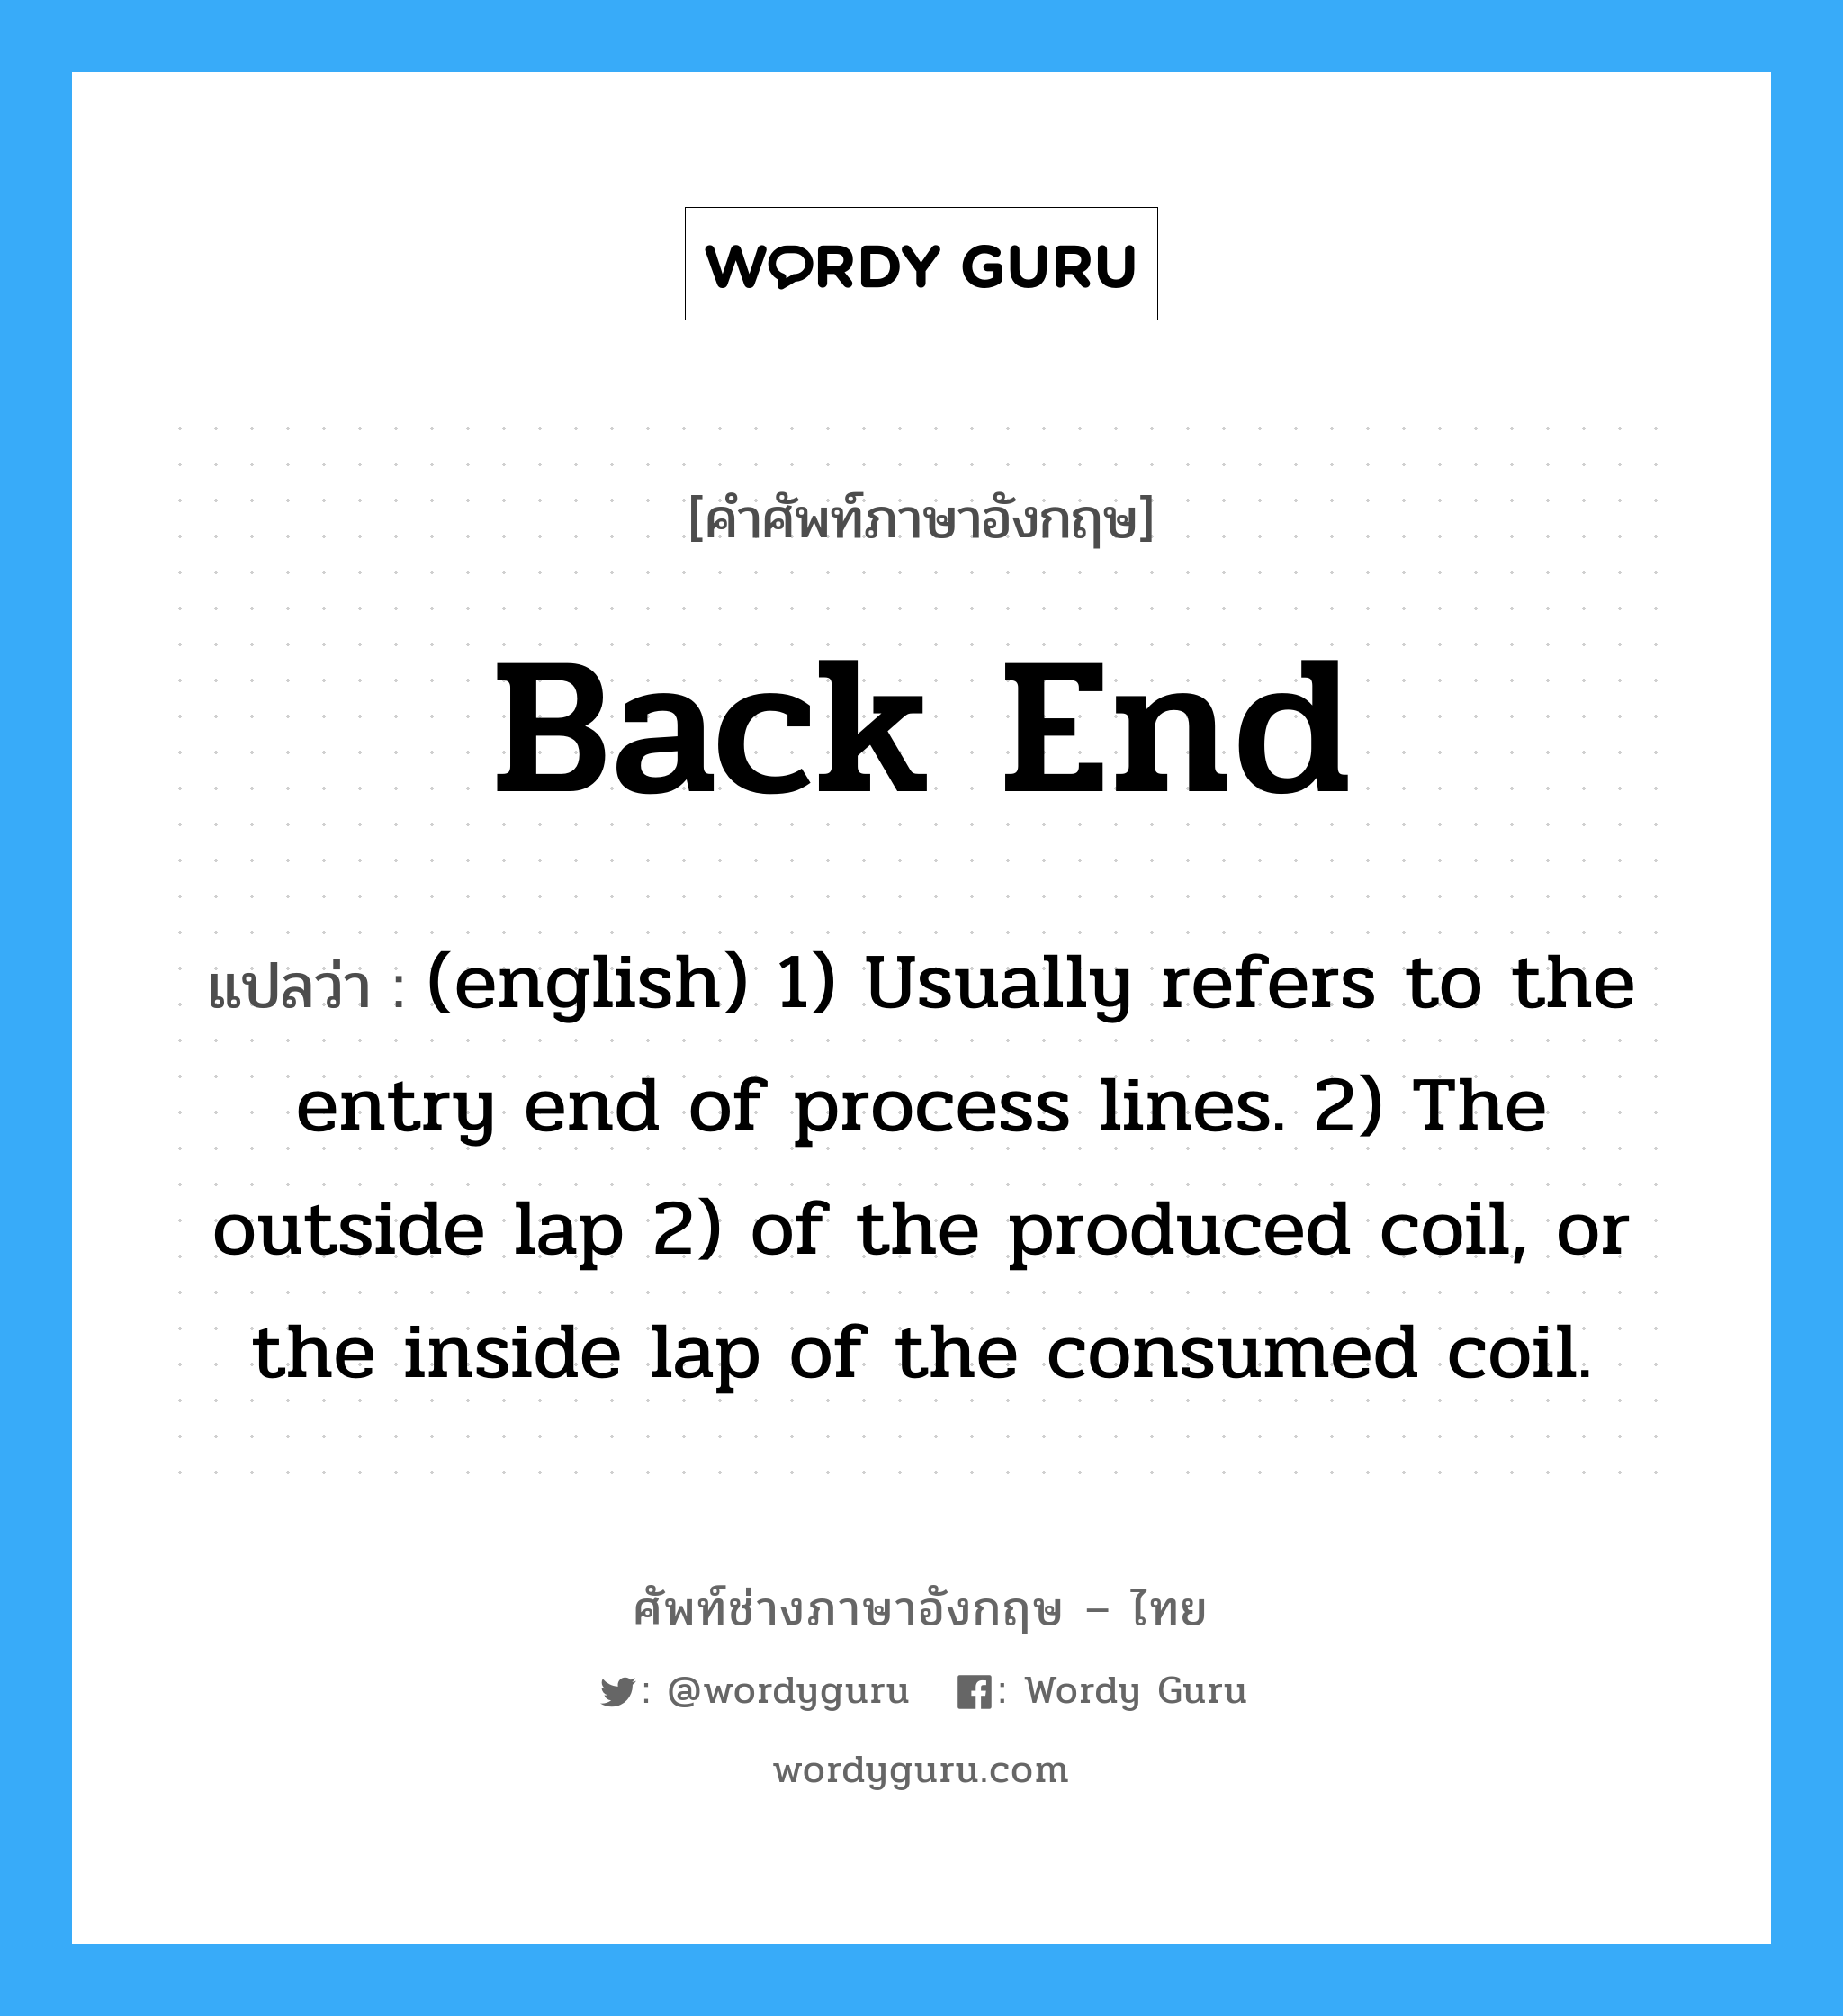 (english) 1) Usually refers to the entry end of process lines. 2) The outside lap 2) of the produced coil, or the inside lap of the consumed coil. ภาษาอังกฤษ?, คำศัพท์ช่างภาษาอังกฤษ - ไทย (english) 1) Usually refers to the entry end of process lines. 2) The outside lap 2) of the produced coil, or the inside lap of the consumed coil. คำศัพท์ภาษาอังกฤษ (english) 1) Usually refers to the entry end of process lines. 2) The outside lap 2) of the produced coil, or the inside lap of the consumed coil. แปลว่า Back End